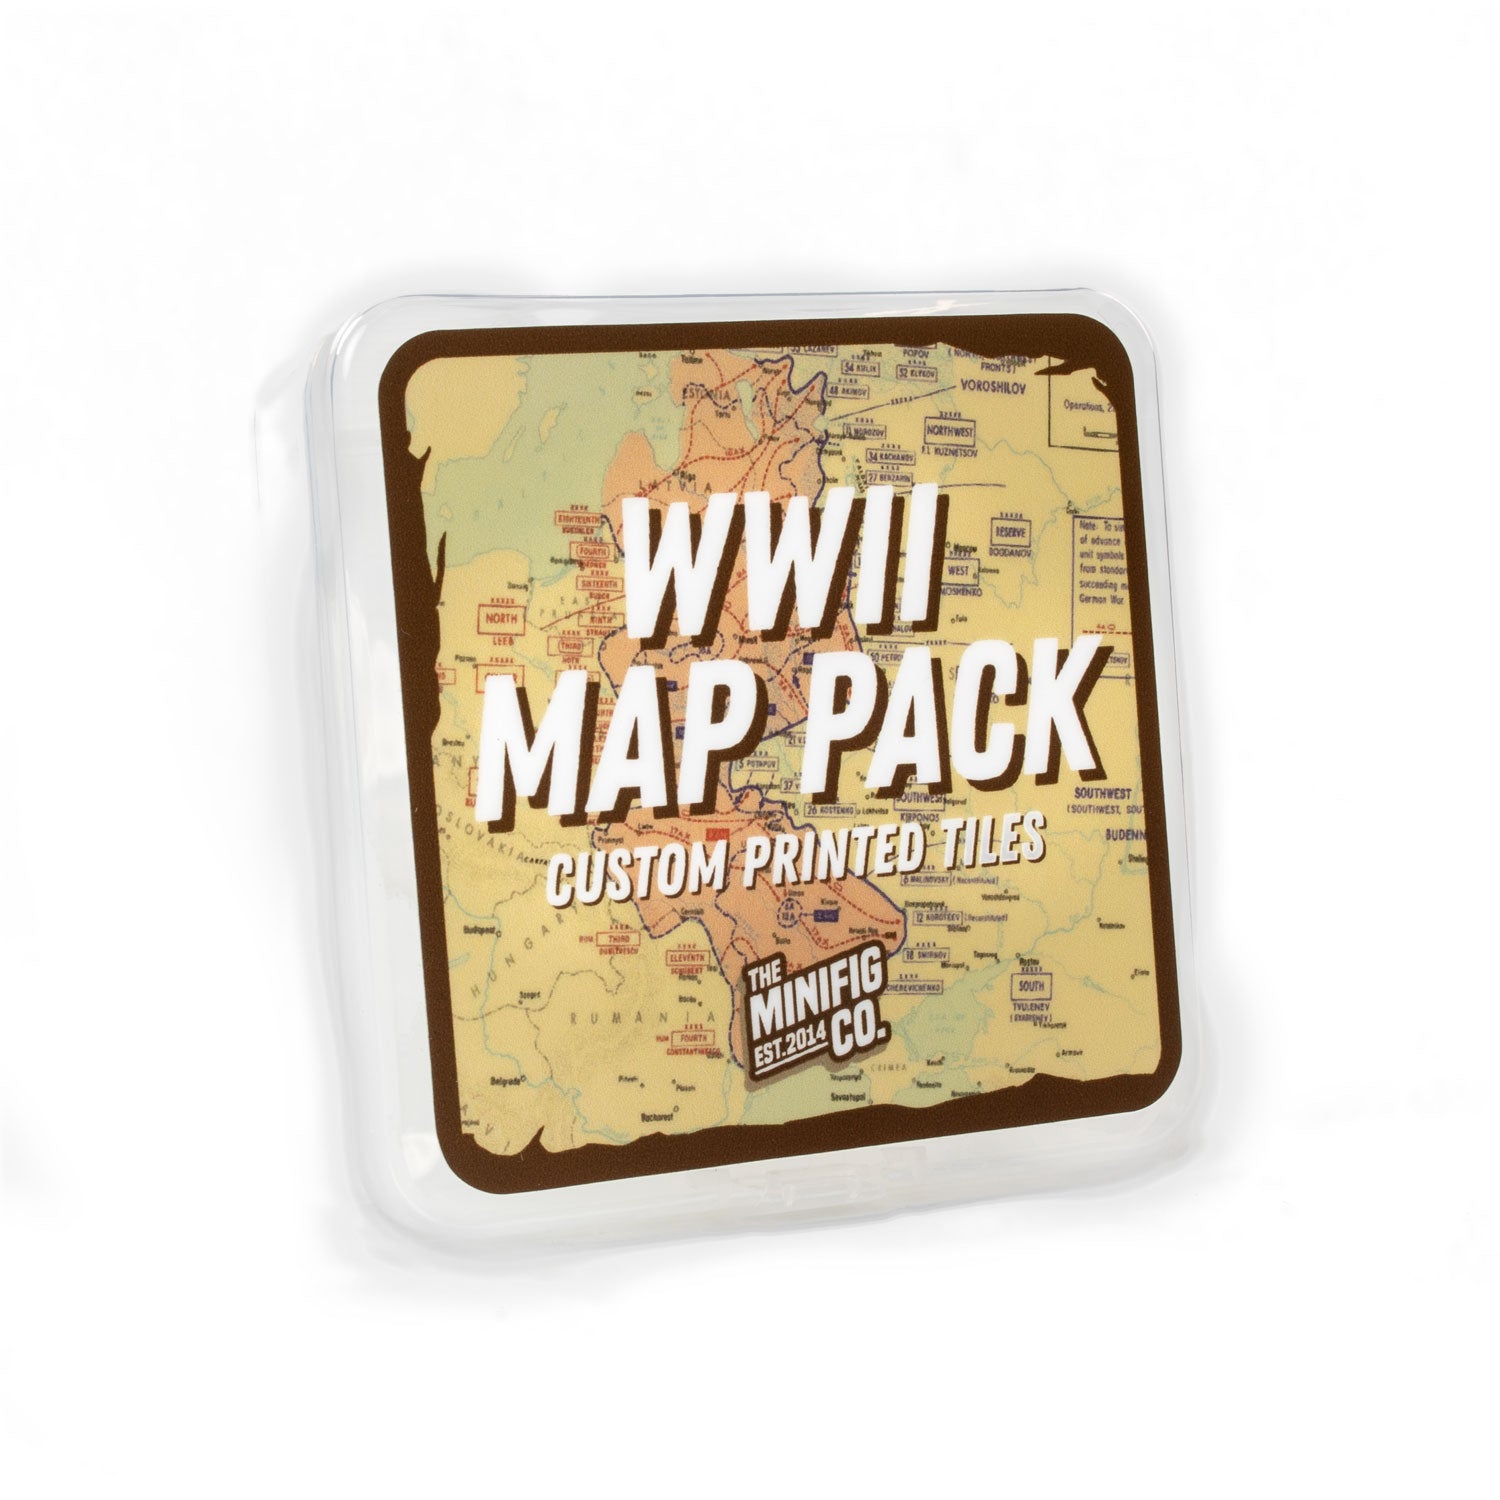 Custom Printed Lego - WWII Map Pack - The Minifig Co.